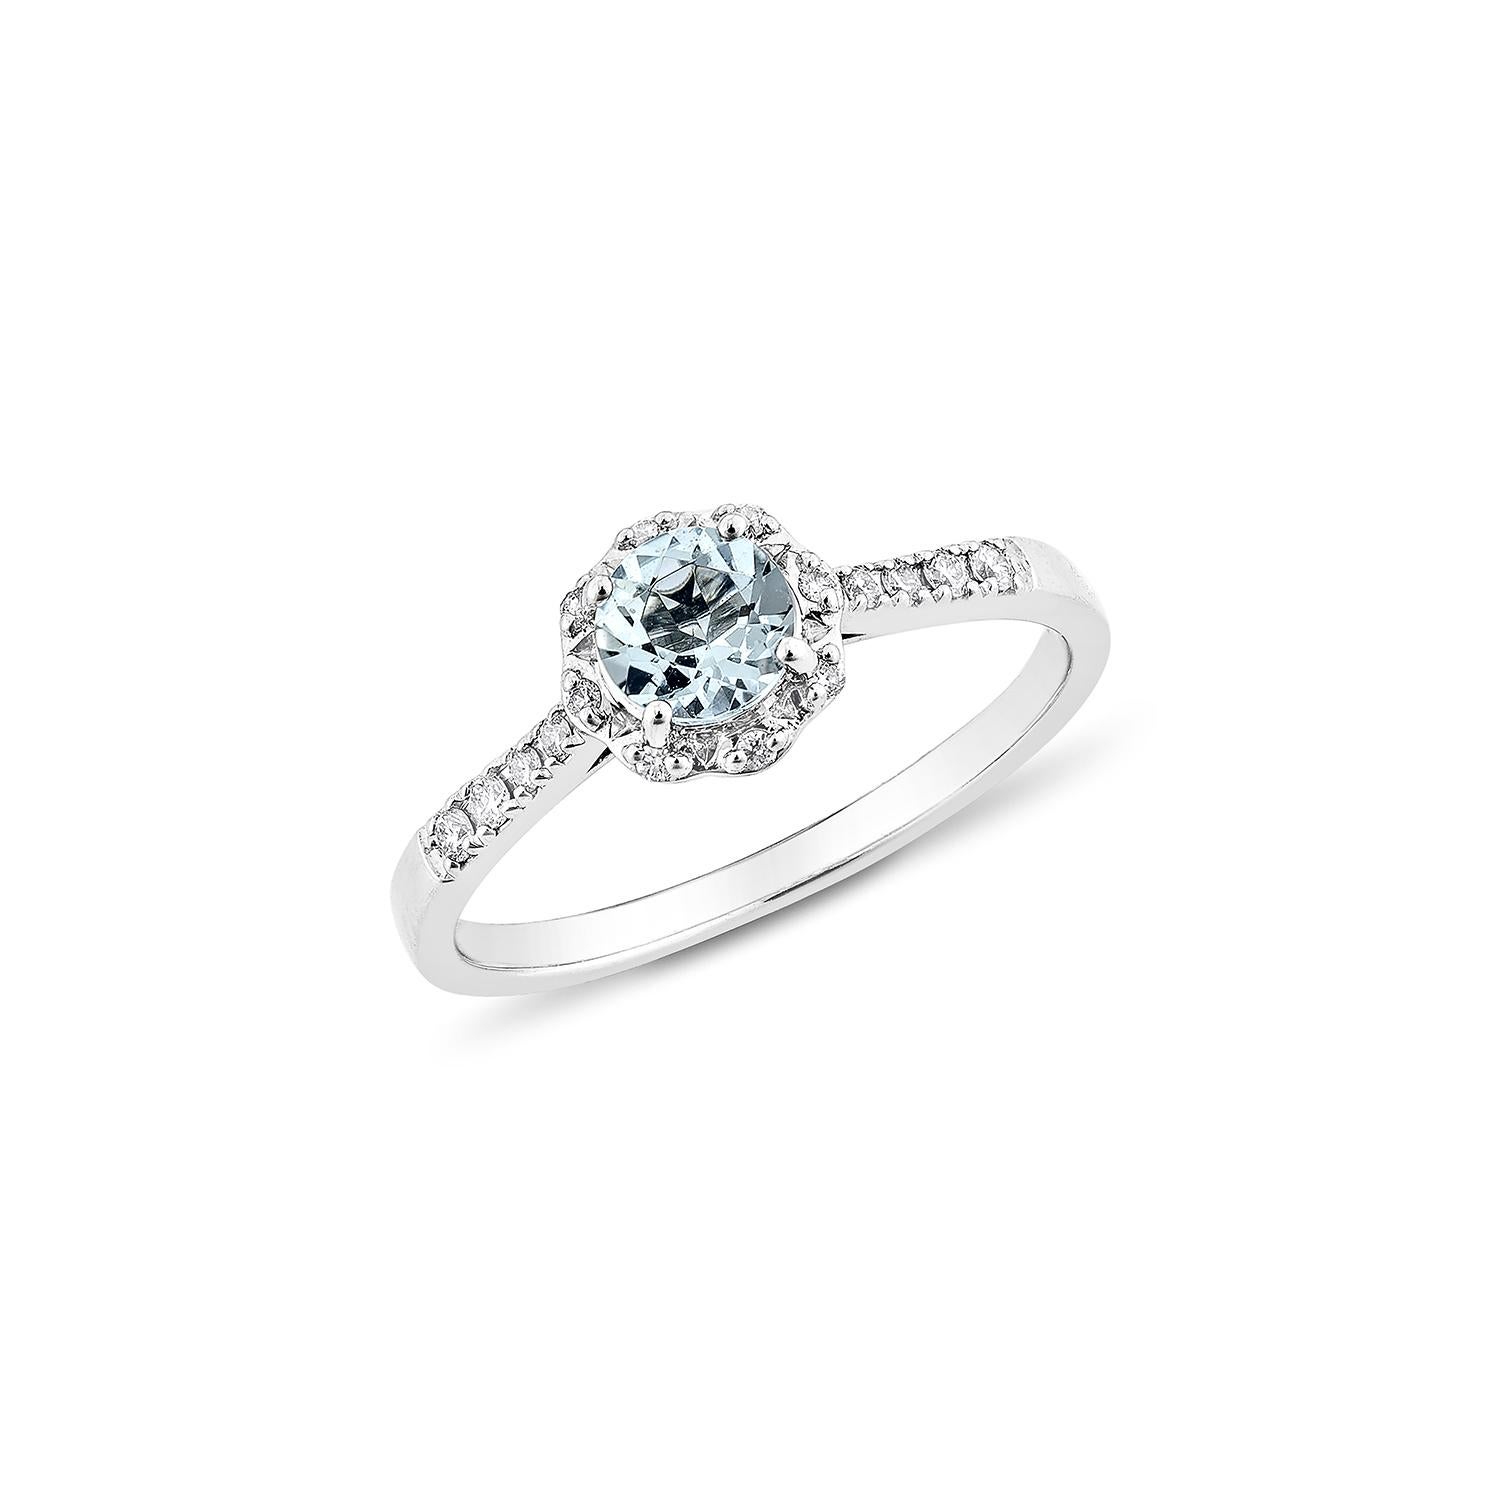 Contemporary 0.41 Carat Aquamarine Fancy Ring in 14Karat White Gold with White Diamond.   For Sale